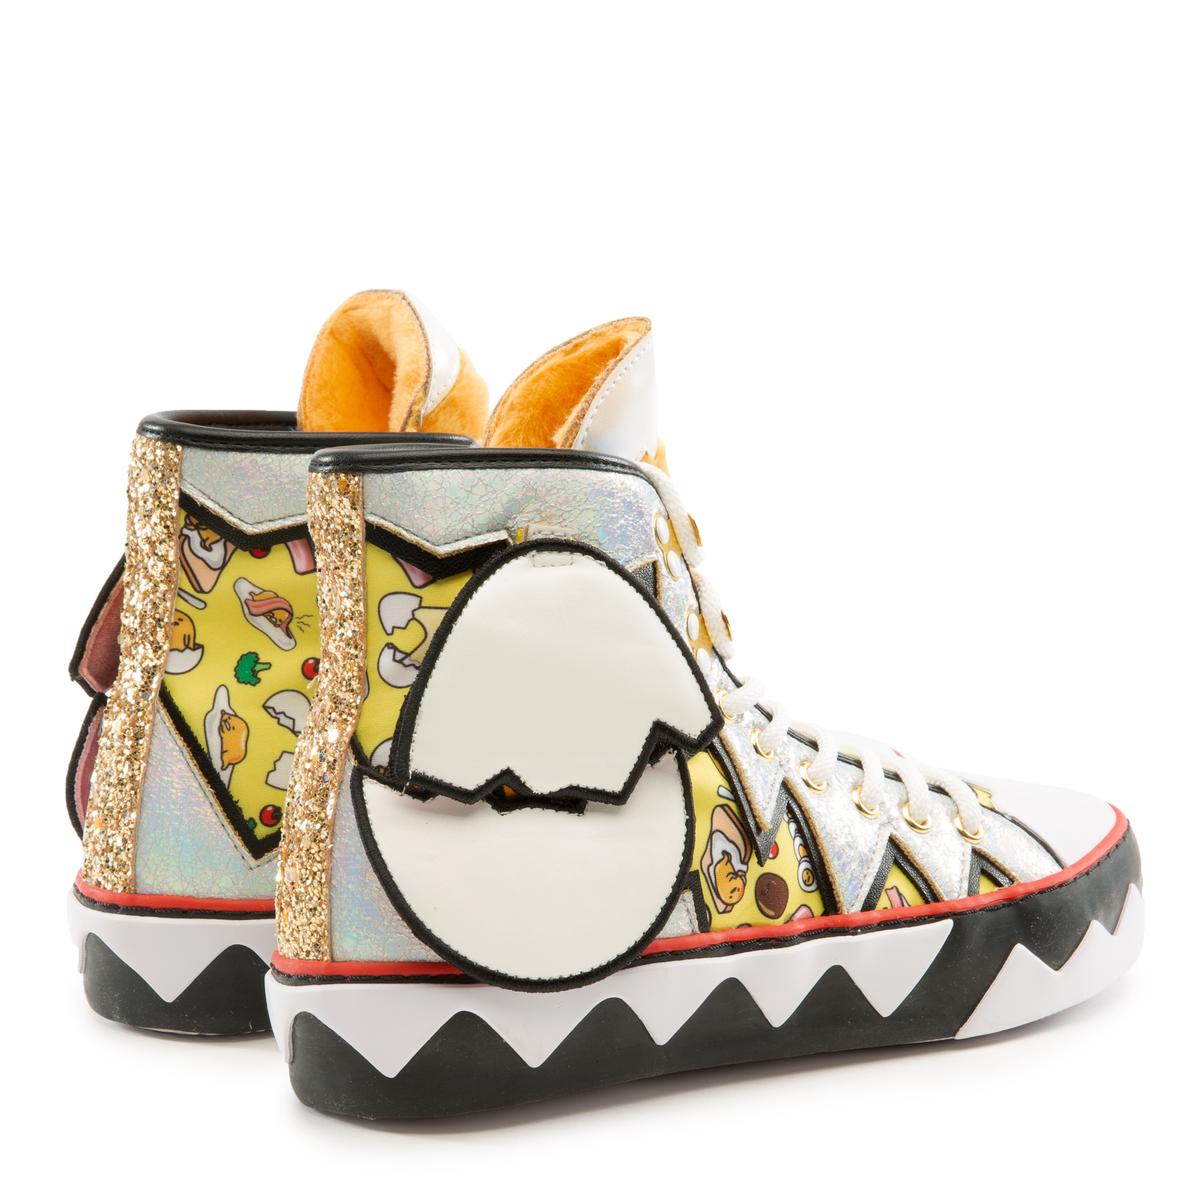 Hello Kitty's You Crack Me Up High Top Sneaker